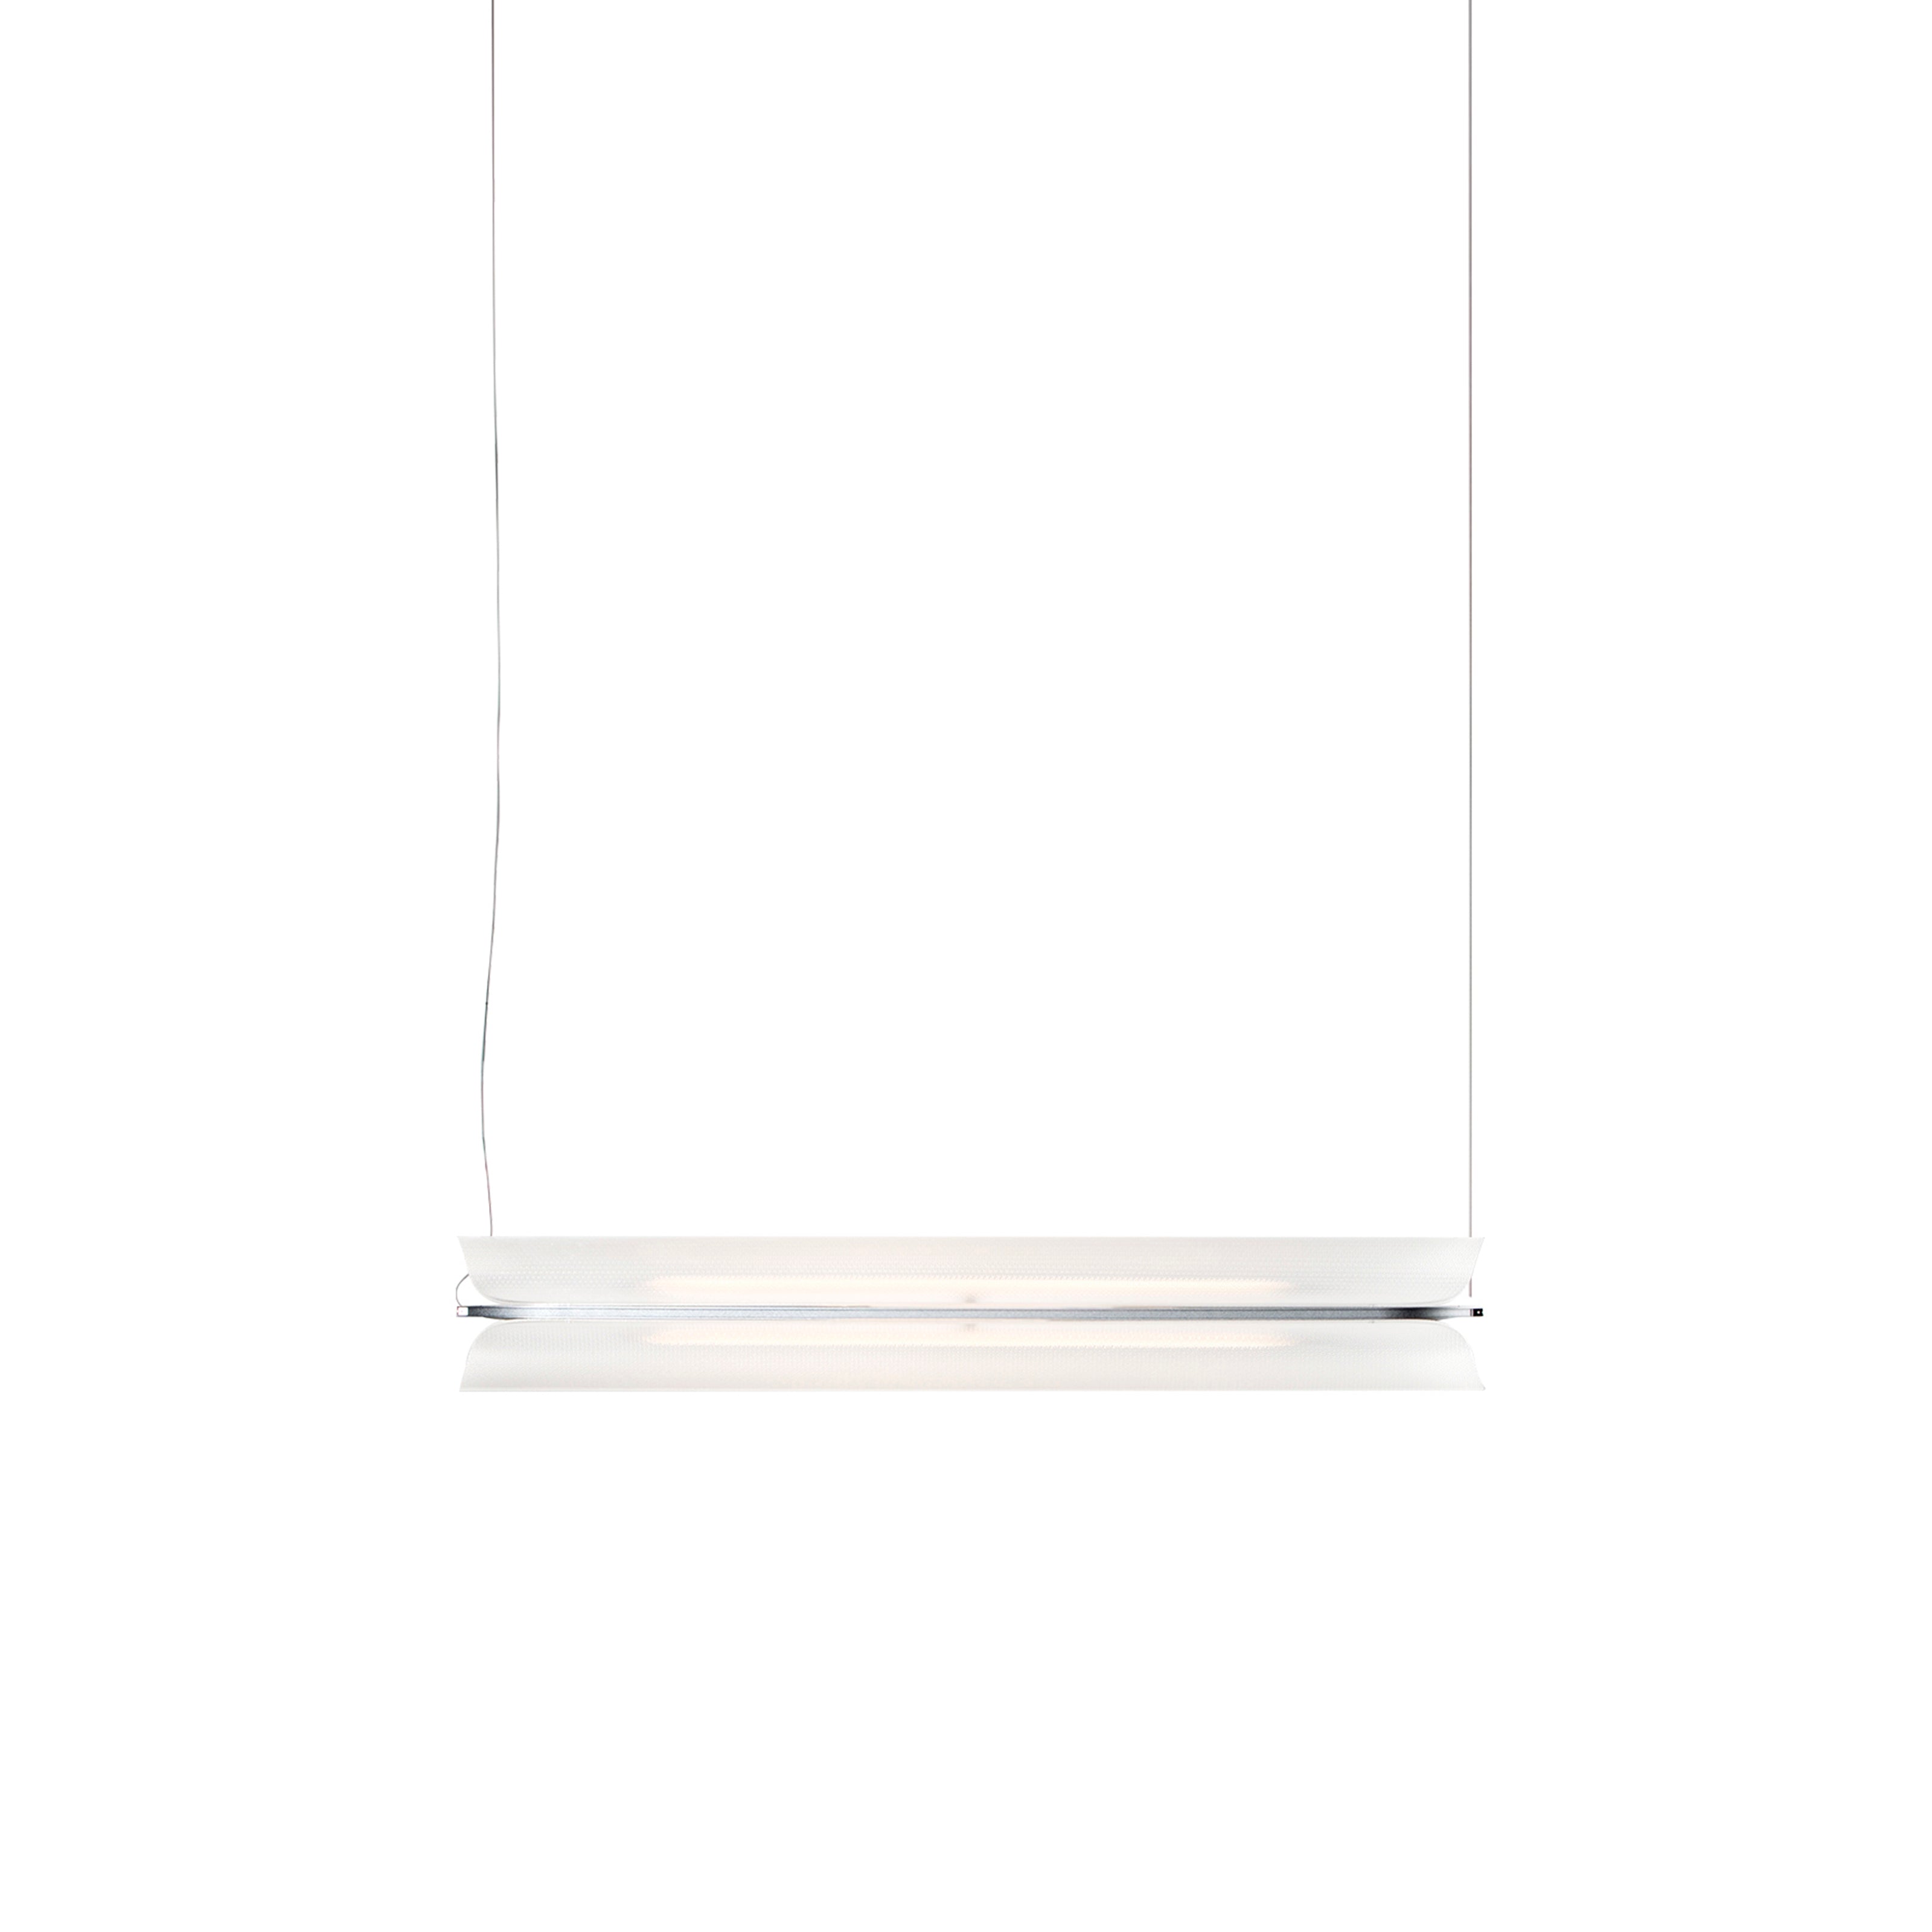 Vale System X-Axis Pendant Light: Horizontal + End-to-End: Vale 1